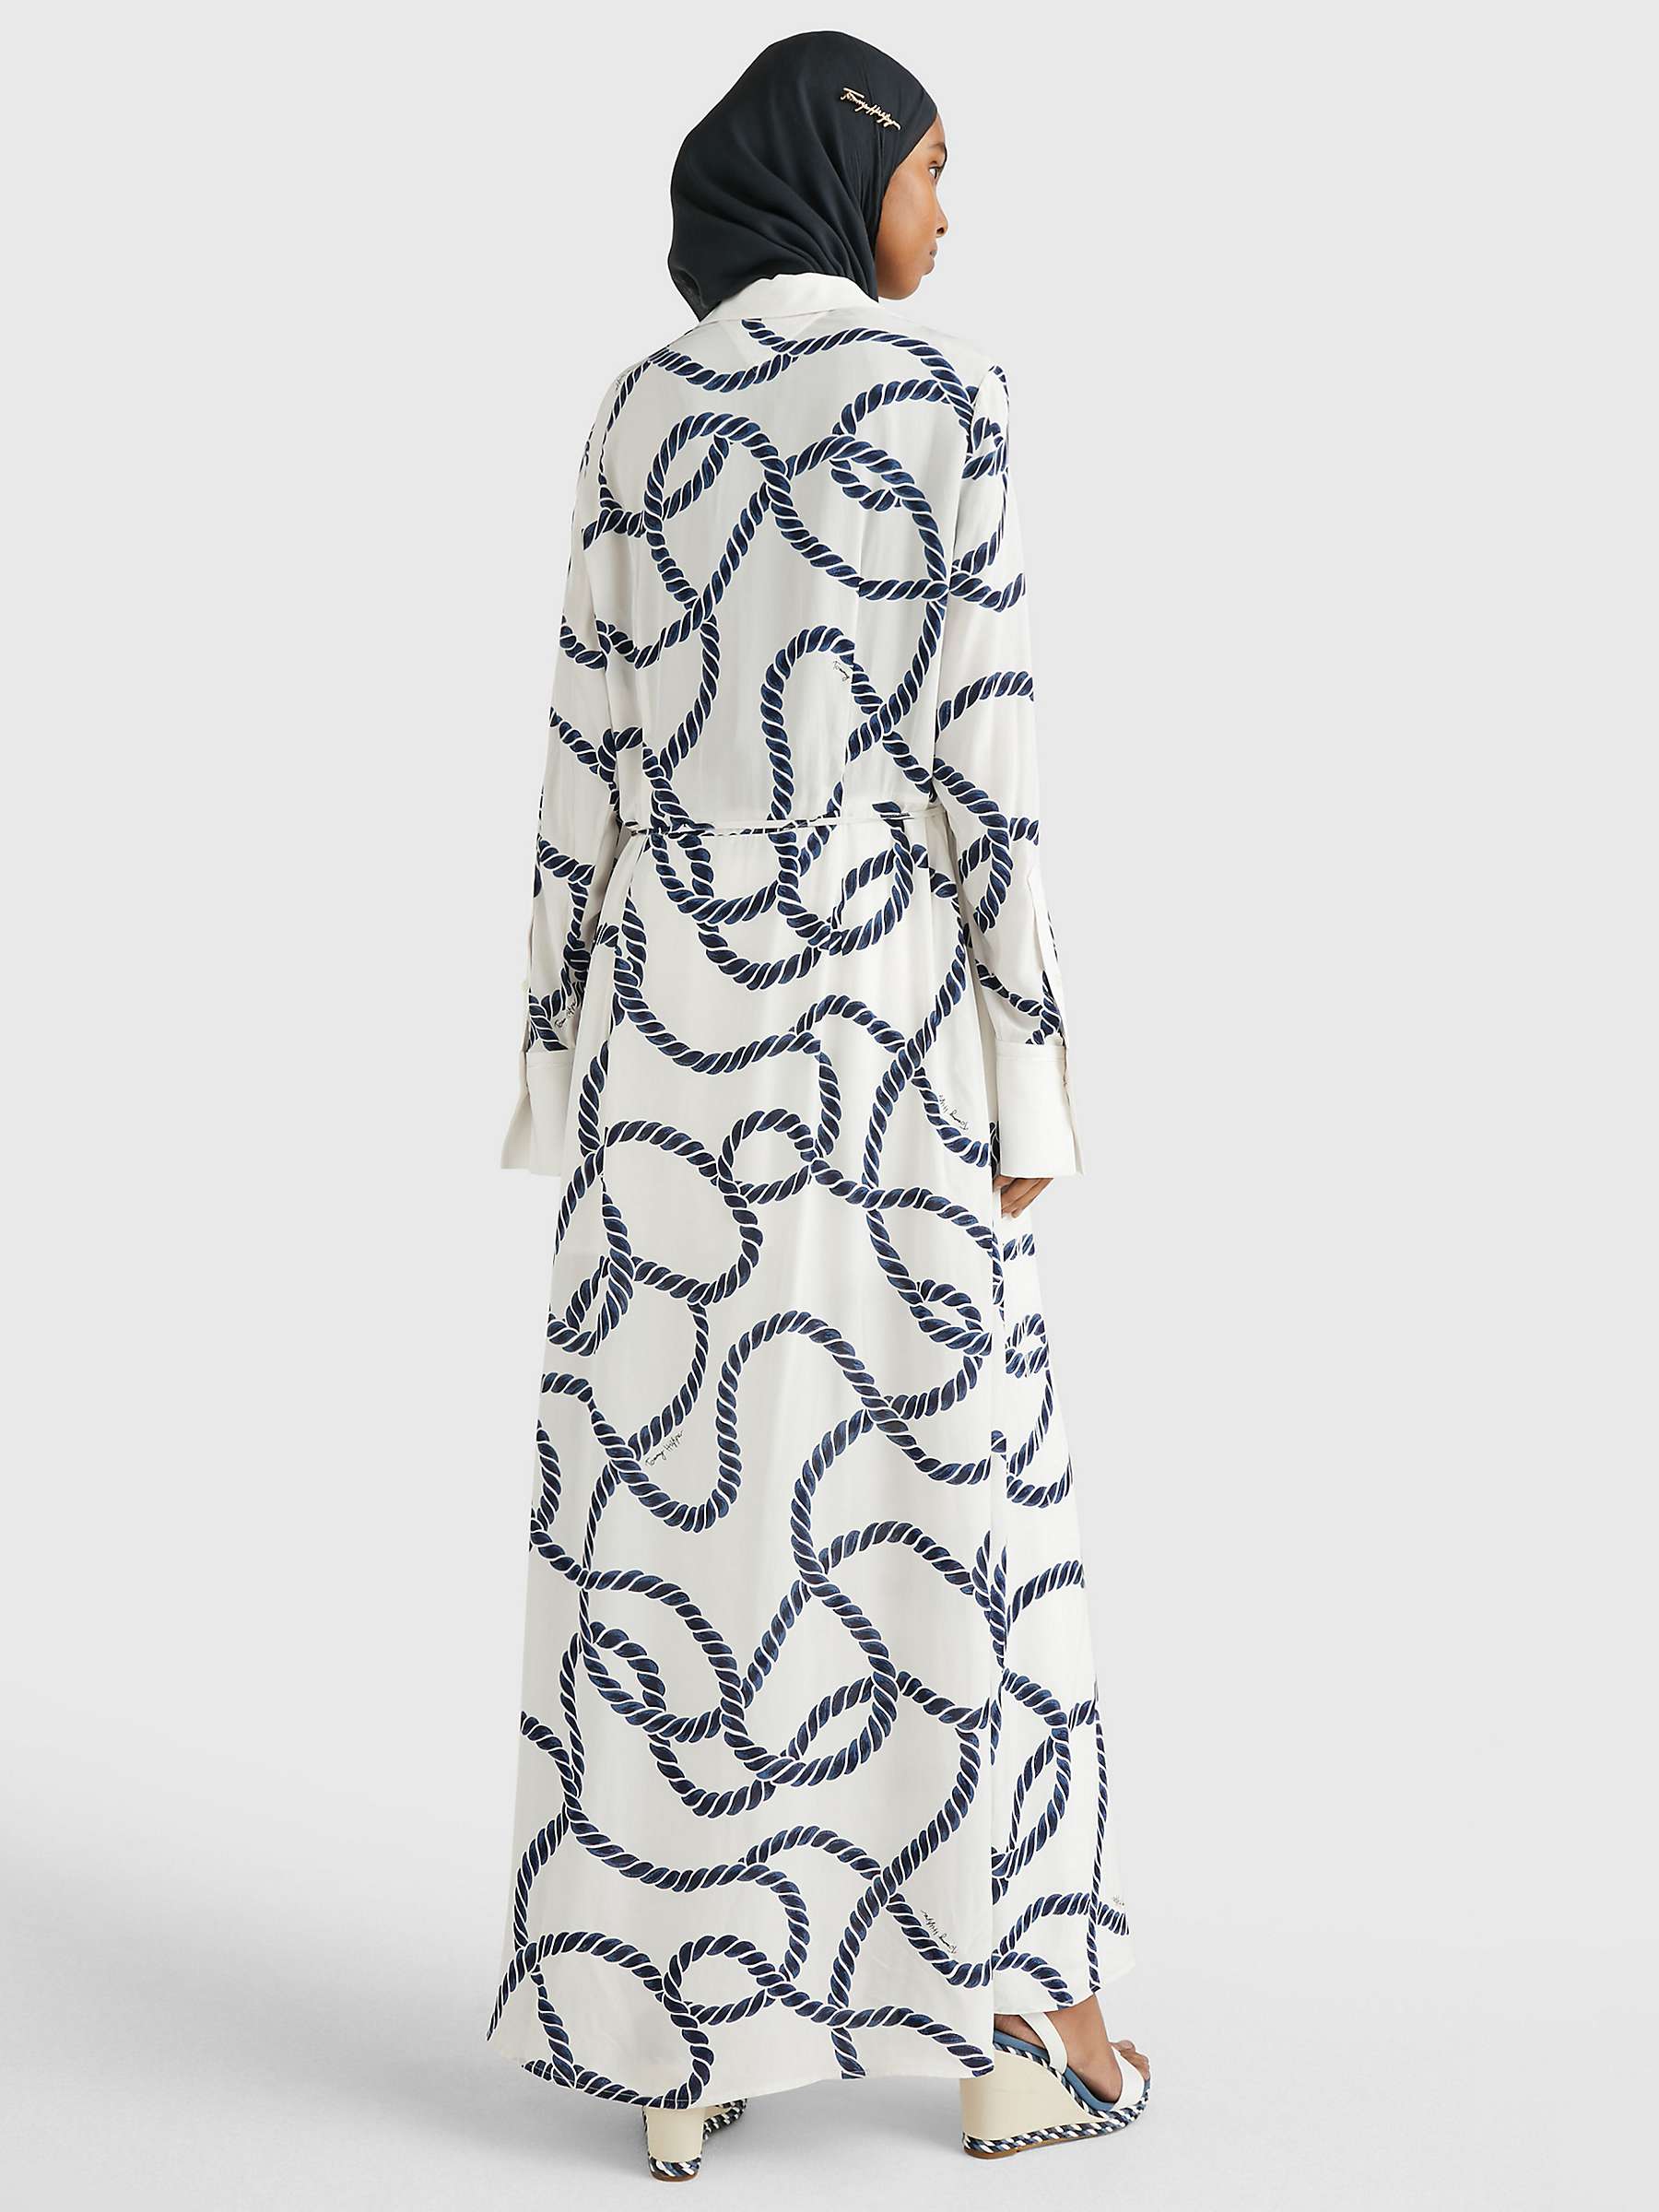 Buy Tommy Hilfiger Rope Print Maxi Dress, White/Navy Online at johnlewis.com